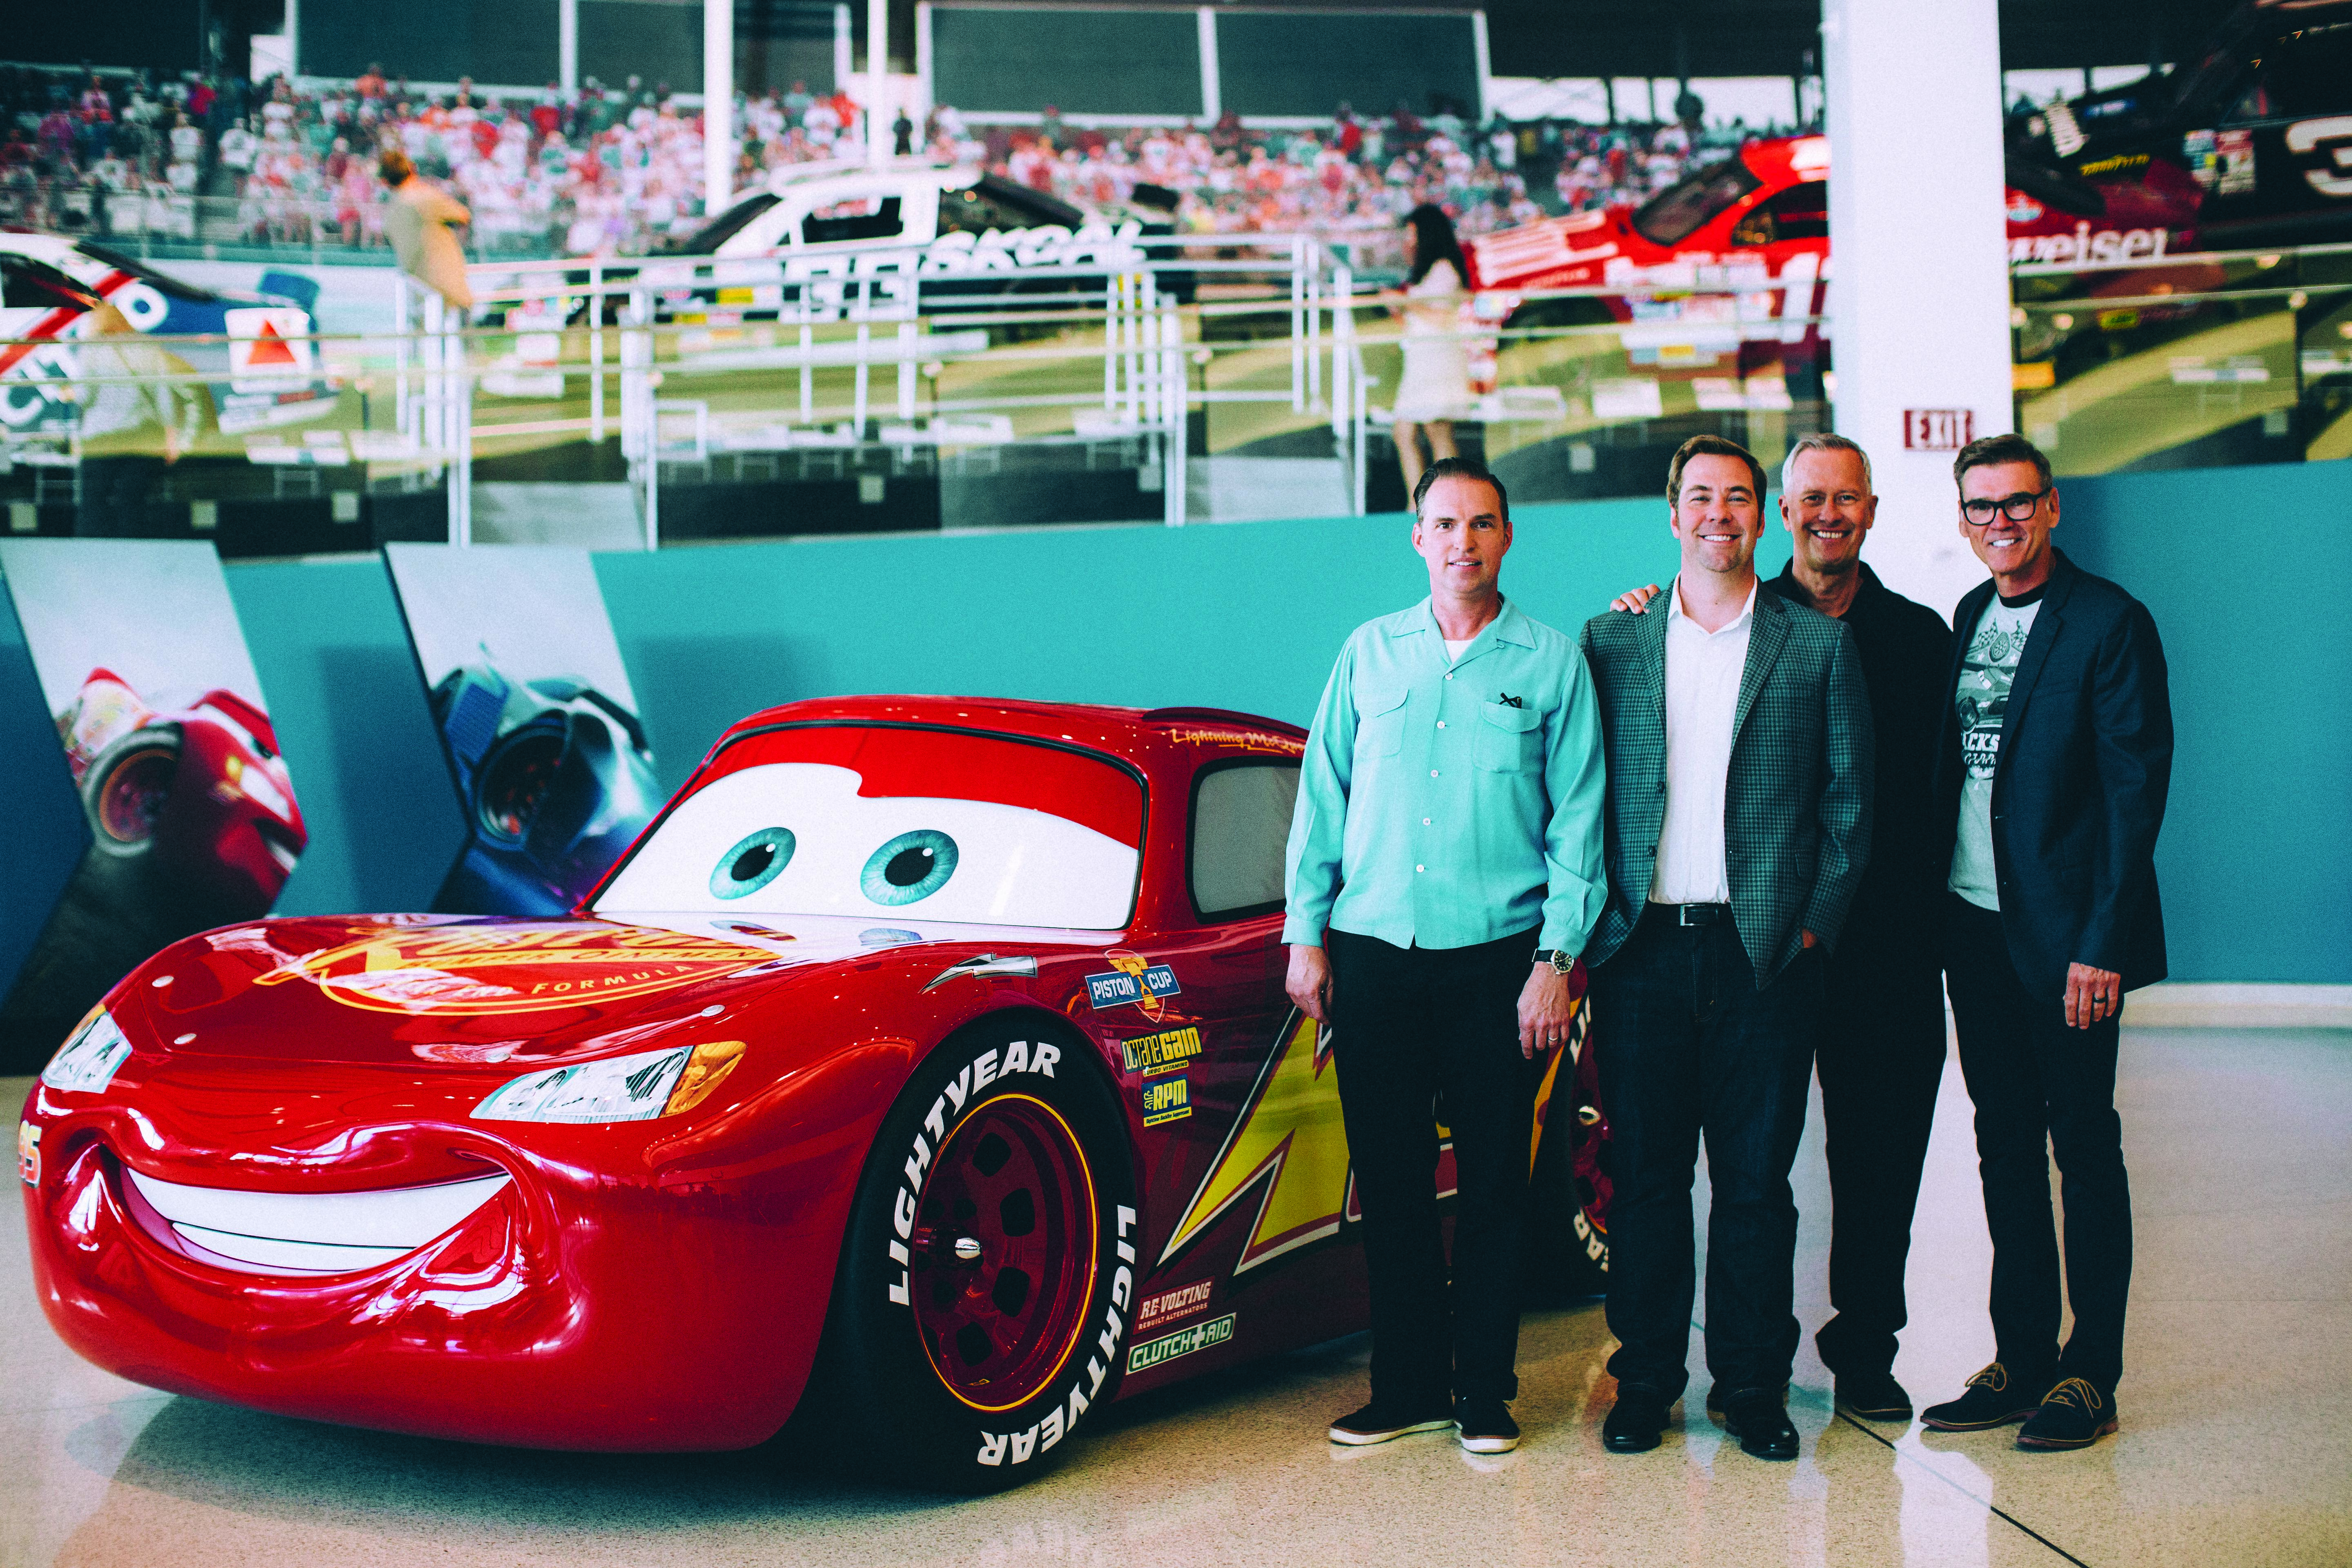 NASCAR Welcomes Lightning McQueen to a New “Cars 3” exhibit at the NASCAR Hall of Fame